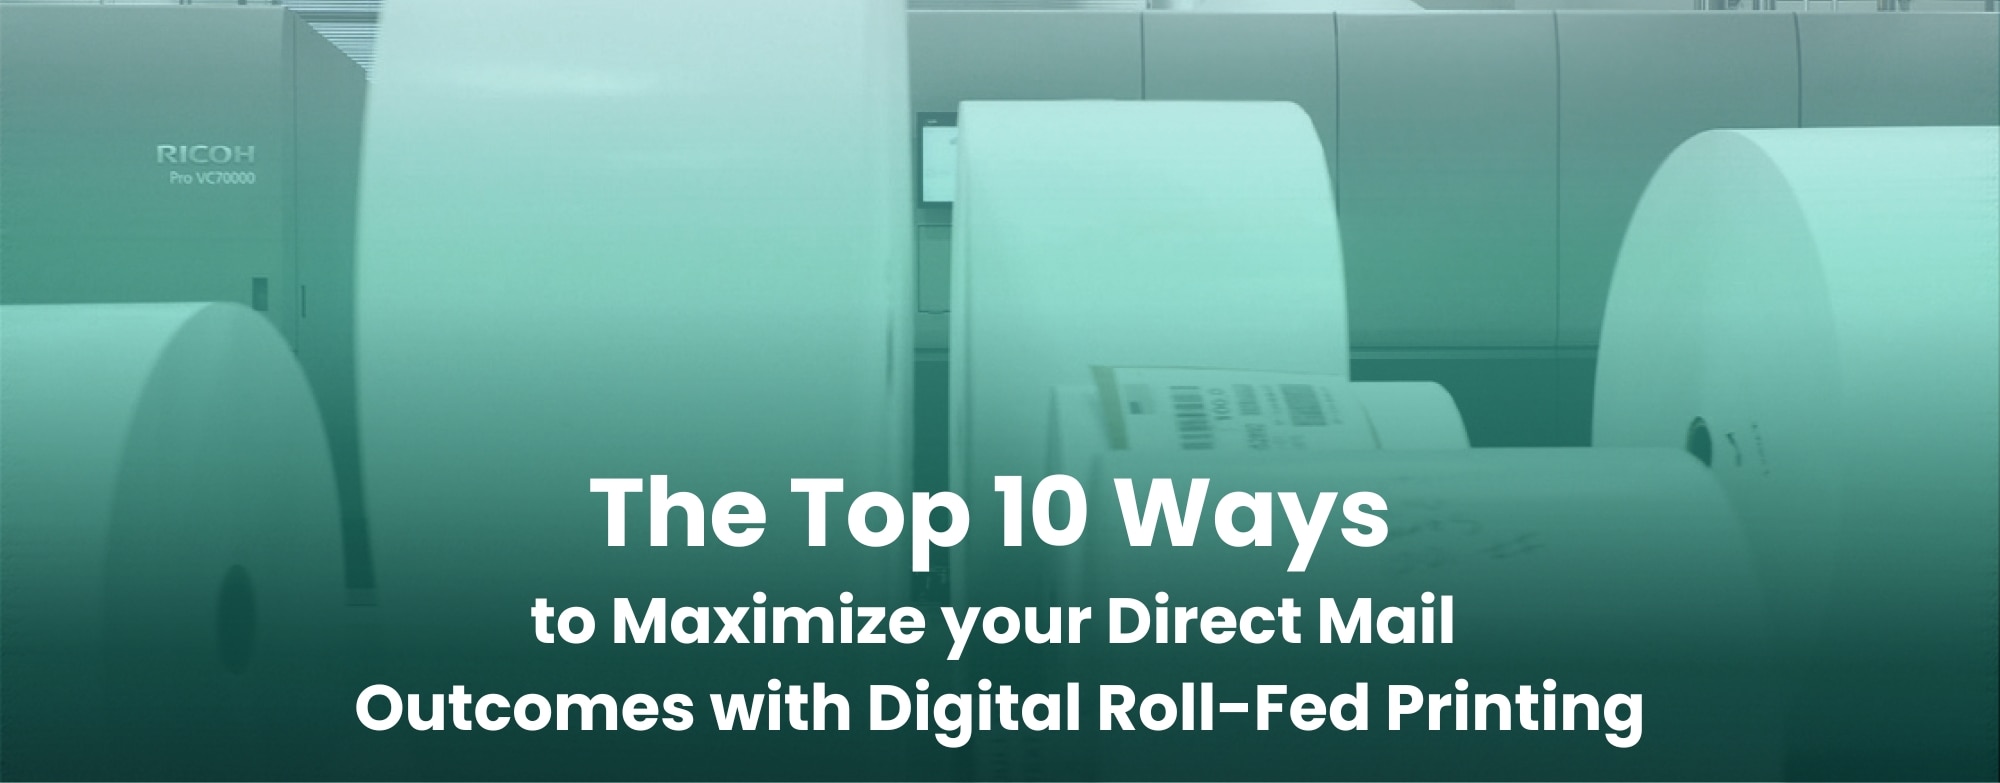 The Top 10 ways to maximize your direct mail outcomes with digital roll-fed printing.